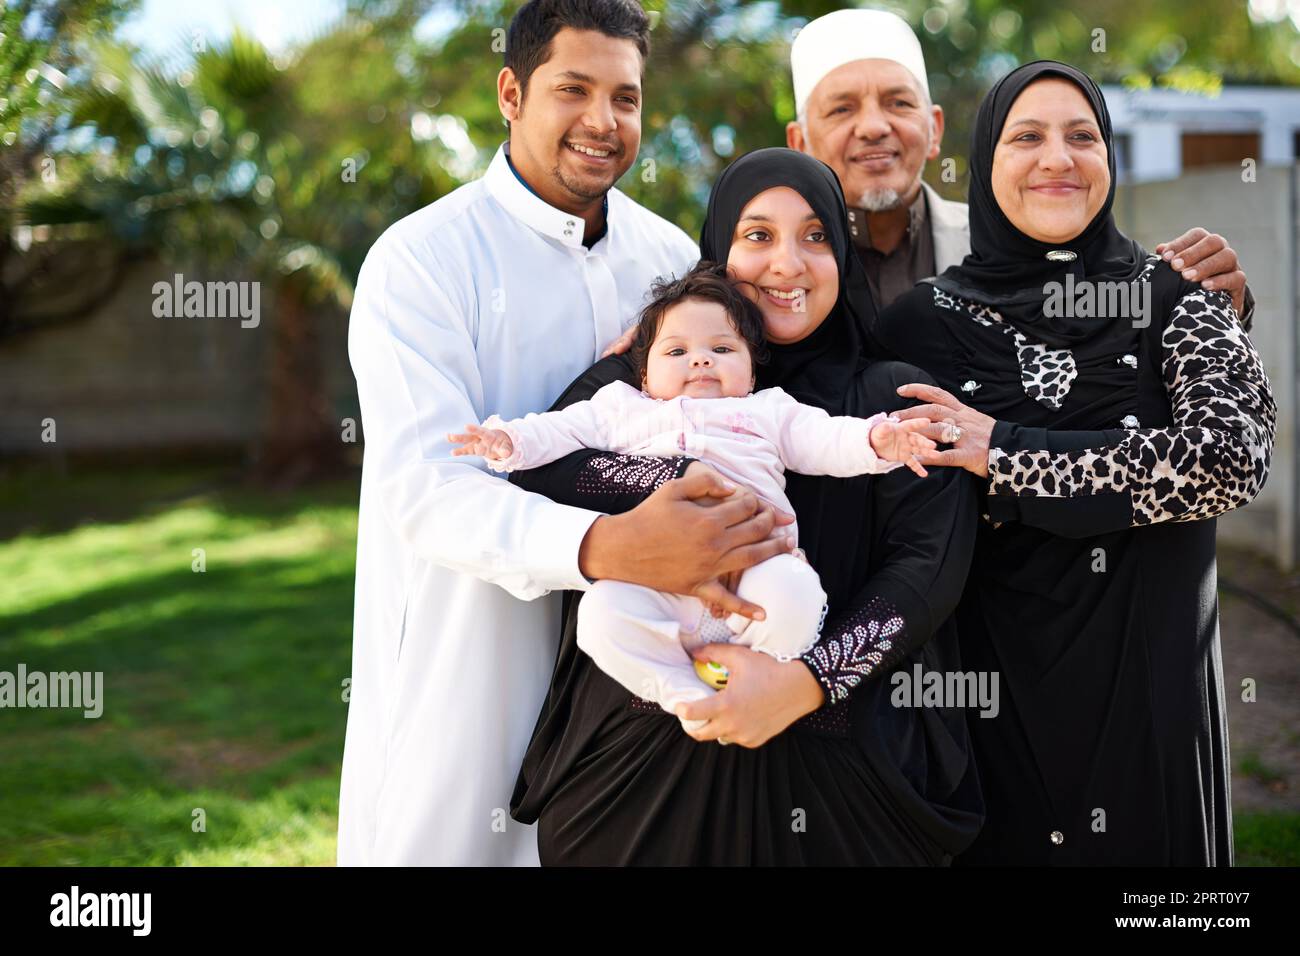 Three generations of love. A muslim family enjoying a day outside. Stock Photo